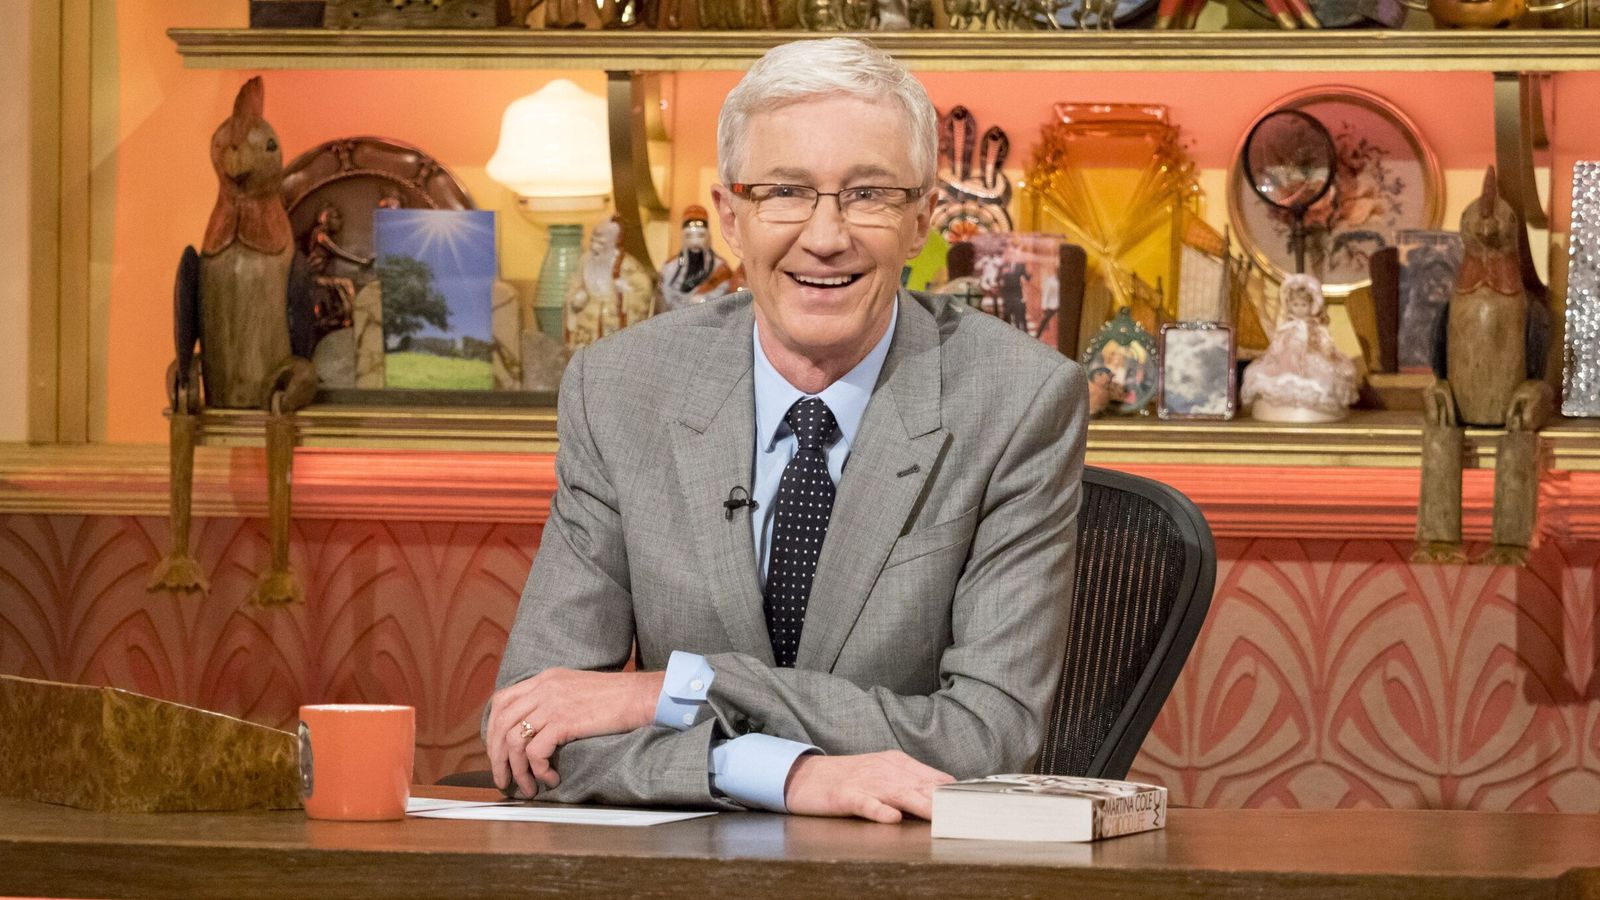 Paul O'Grady, TV star and comedian, dies aged 67